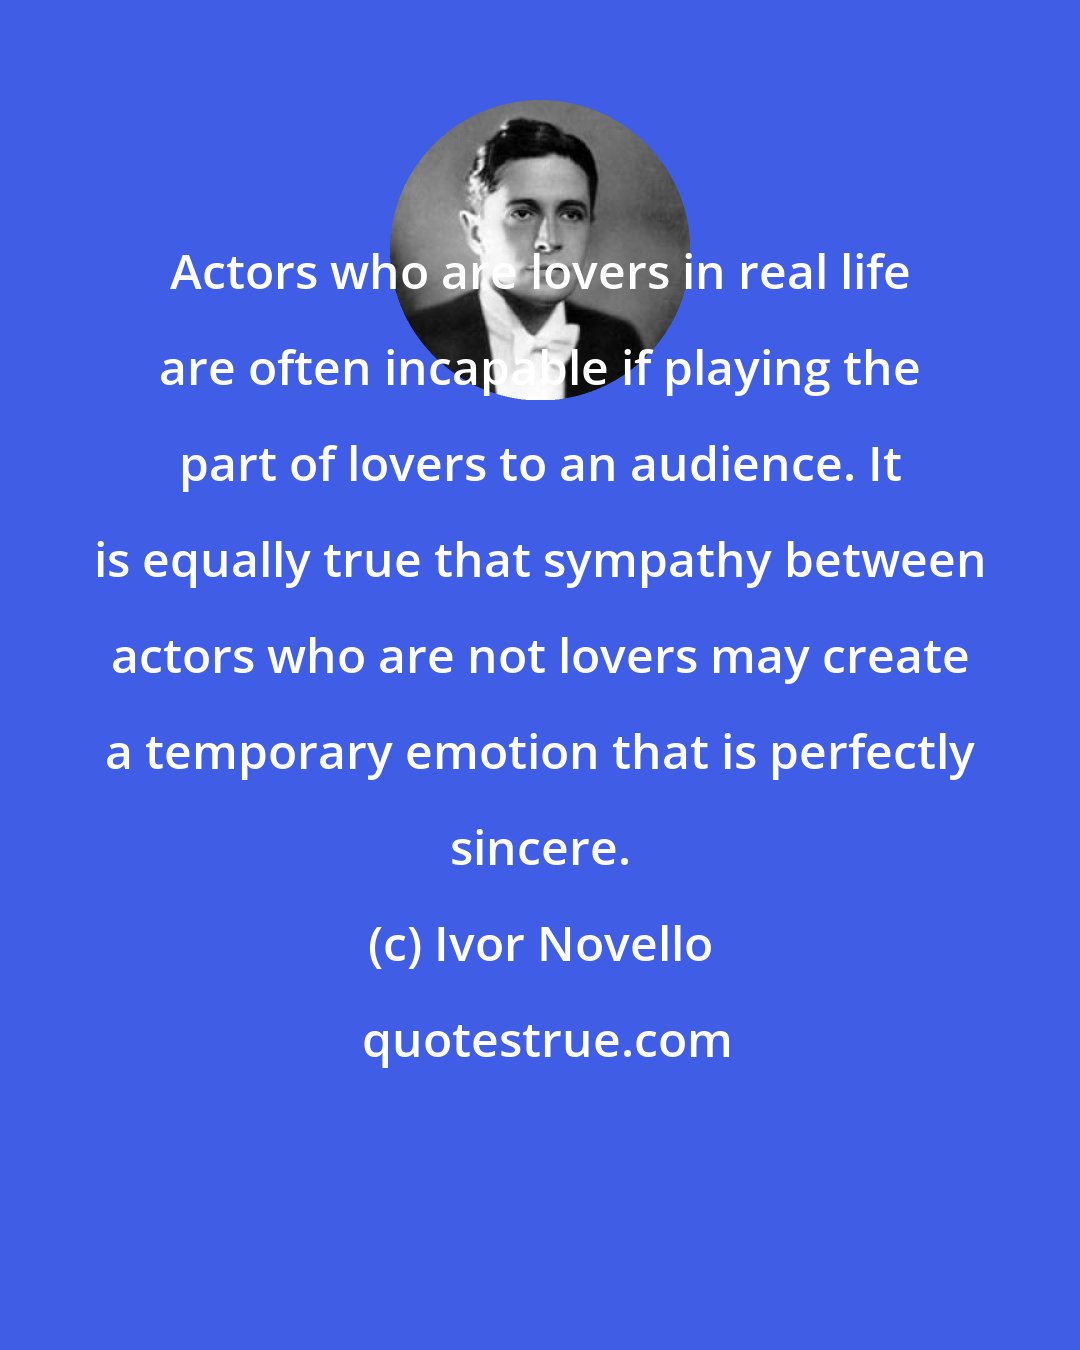 Ivor Novello: Actors who are lovers in real life are often incapable if playing the part of lovers to an audience. It is equally true that sympathy between actors who are not lovers may create a temporary emotion that is perfectly sincere.